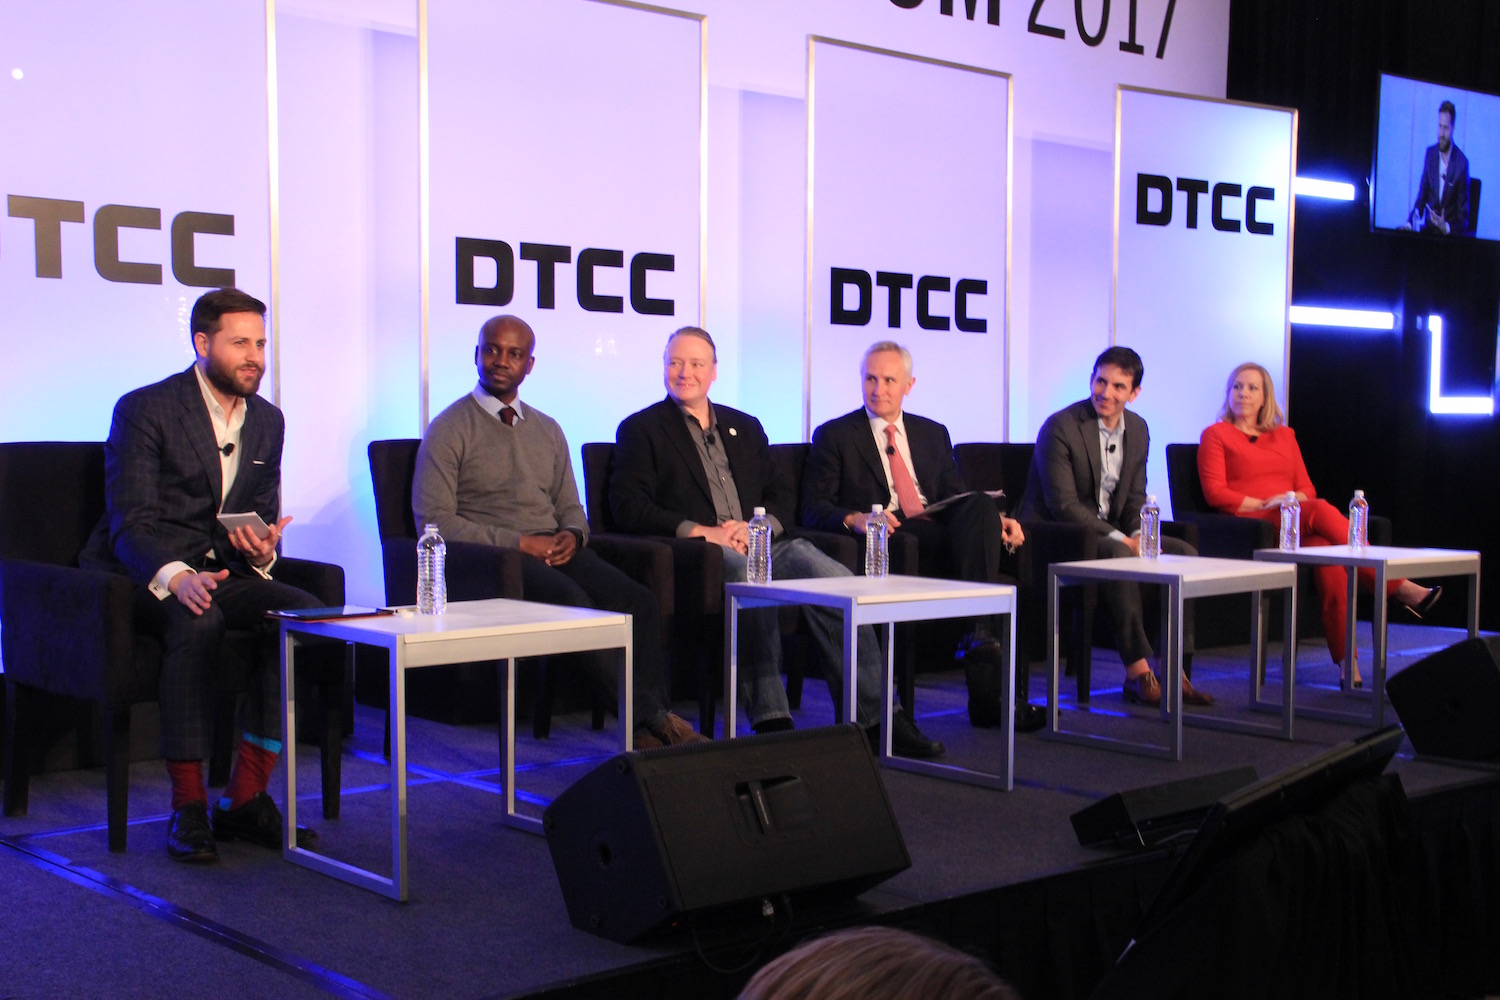 DTCC: Security Tokens Should Be Made To Meet Existing Regulatory Rules